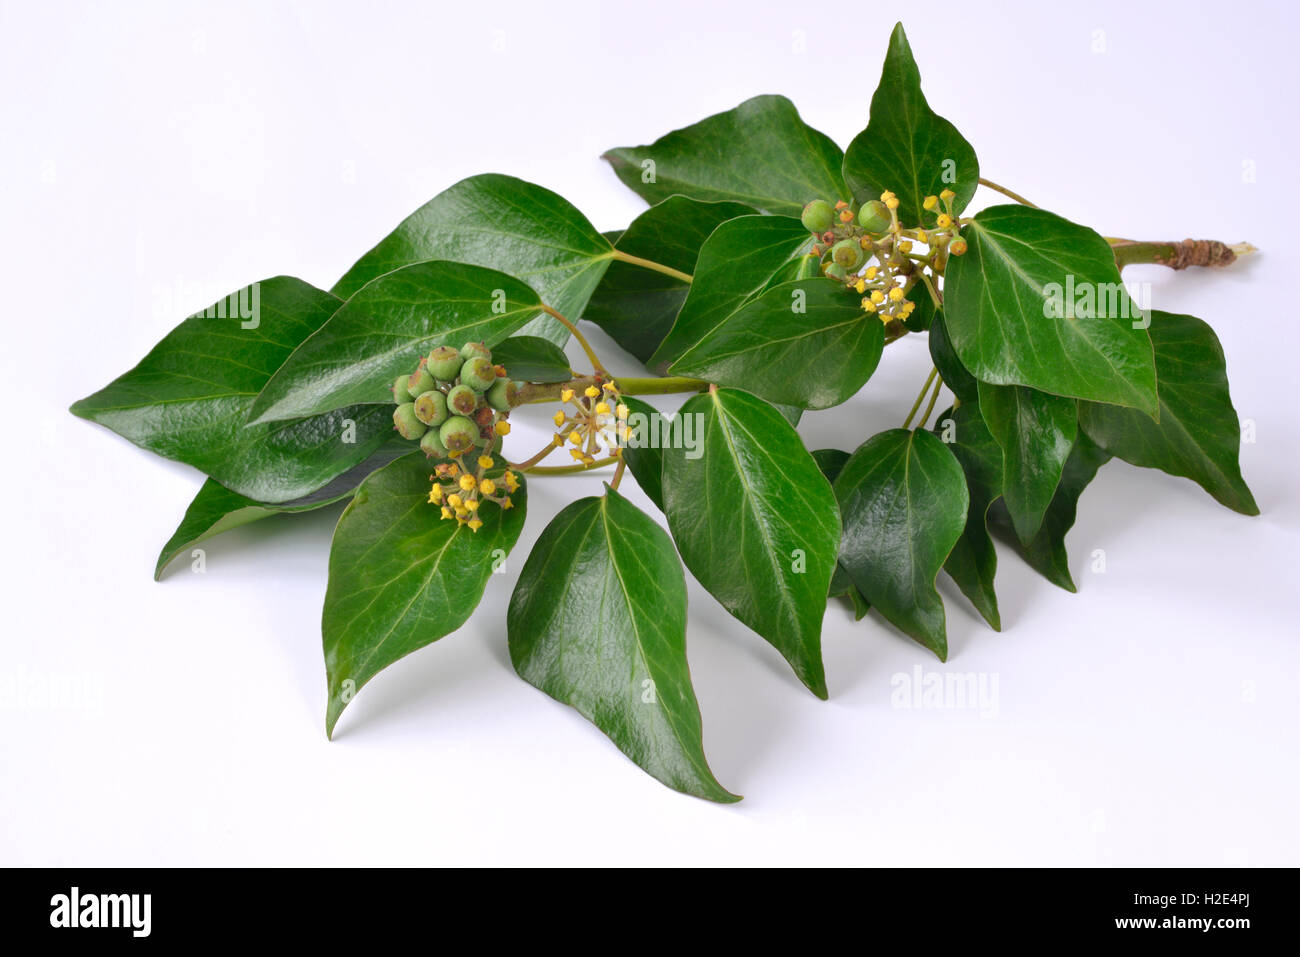 Common Ivy (Hedera helix). Flowering shoot with unripe fruit. Studio picture against a white background Stock Photo